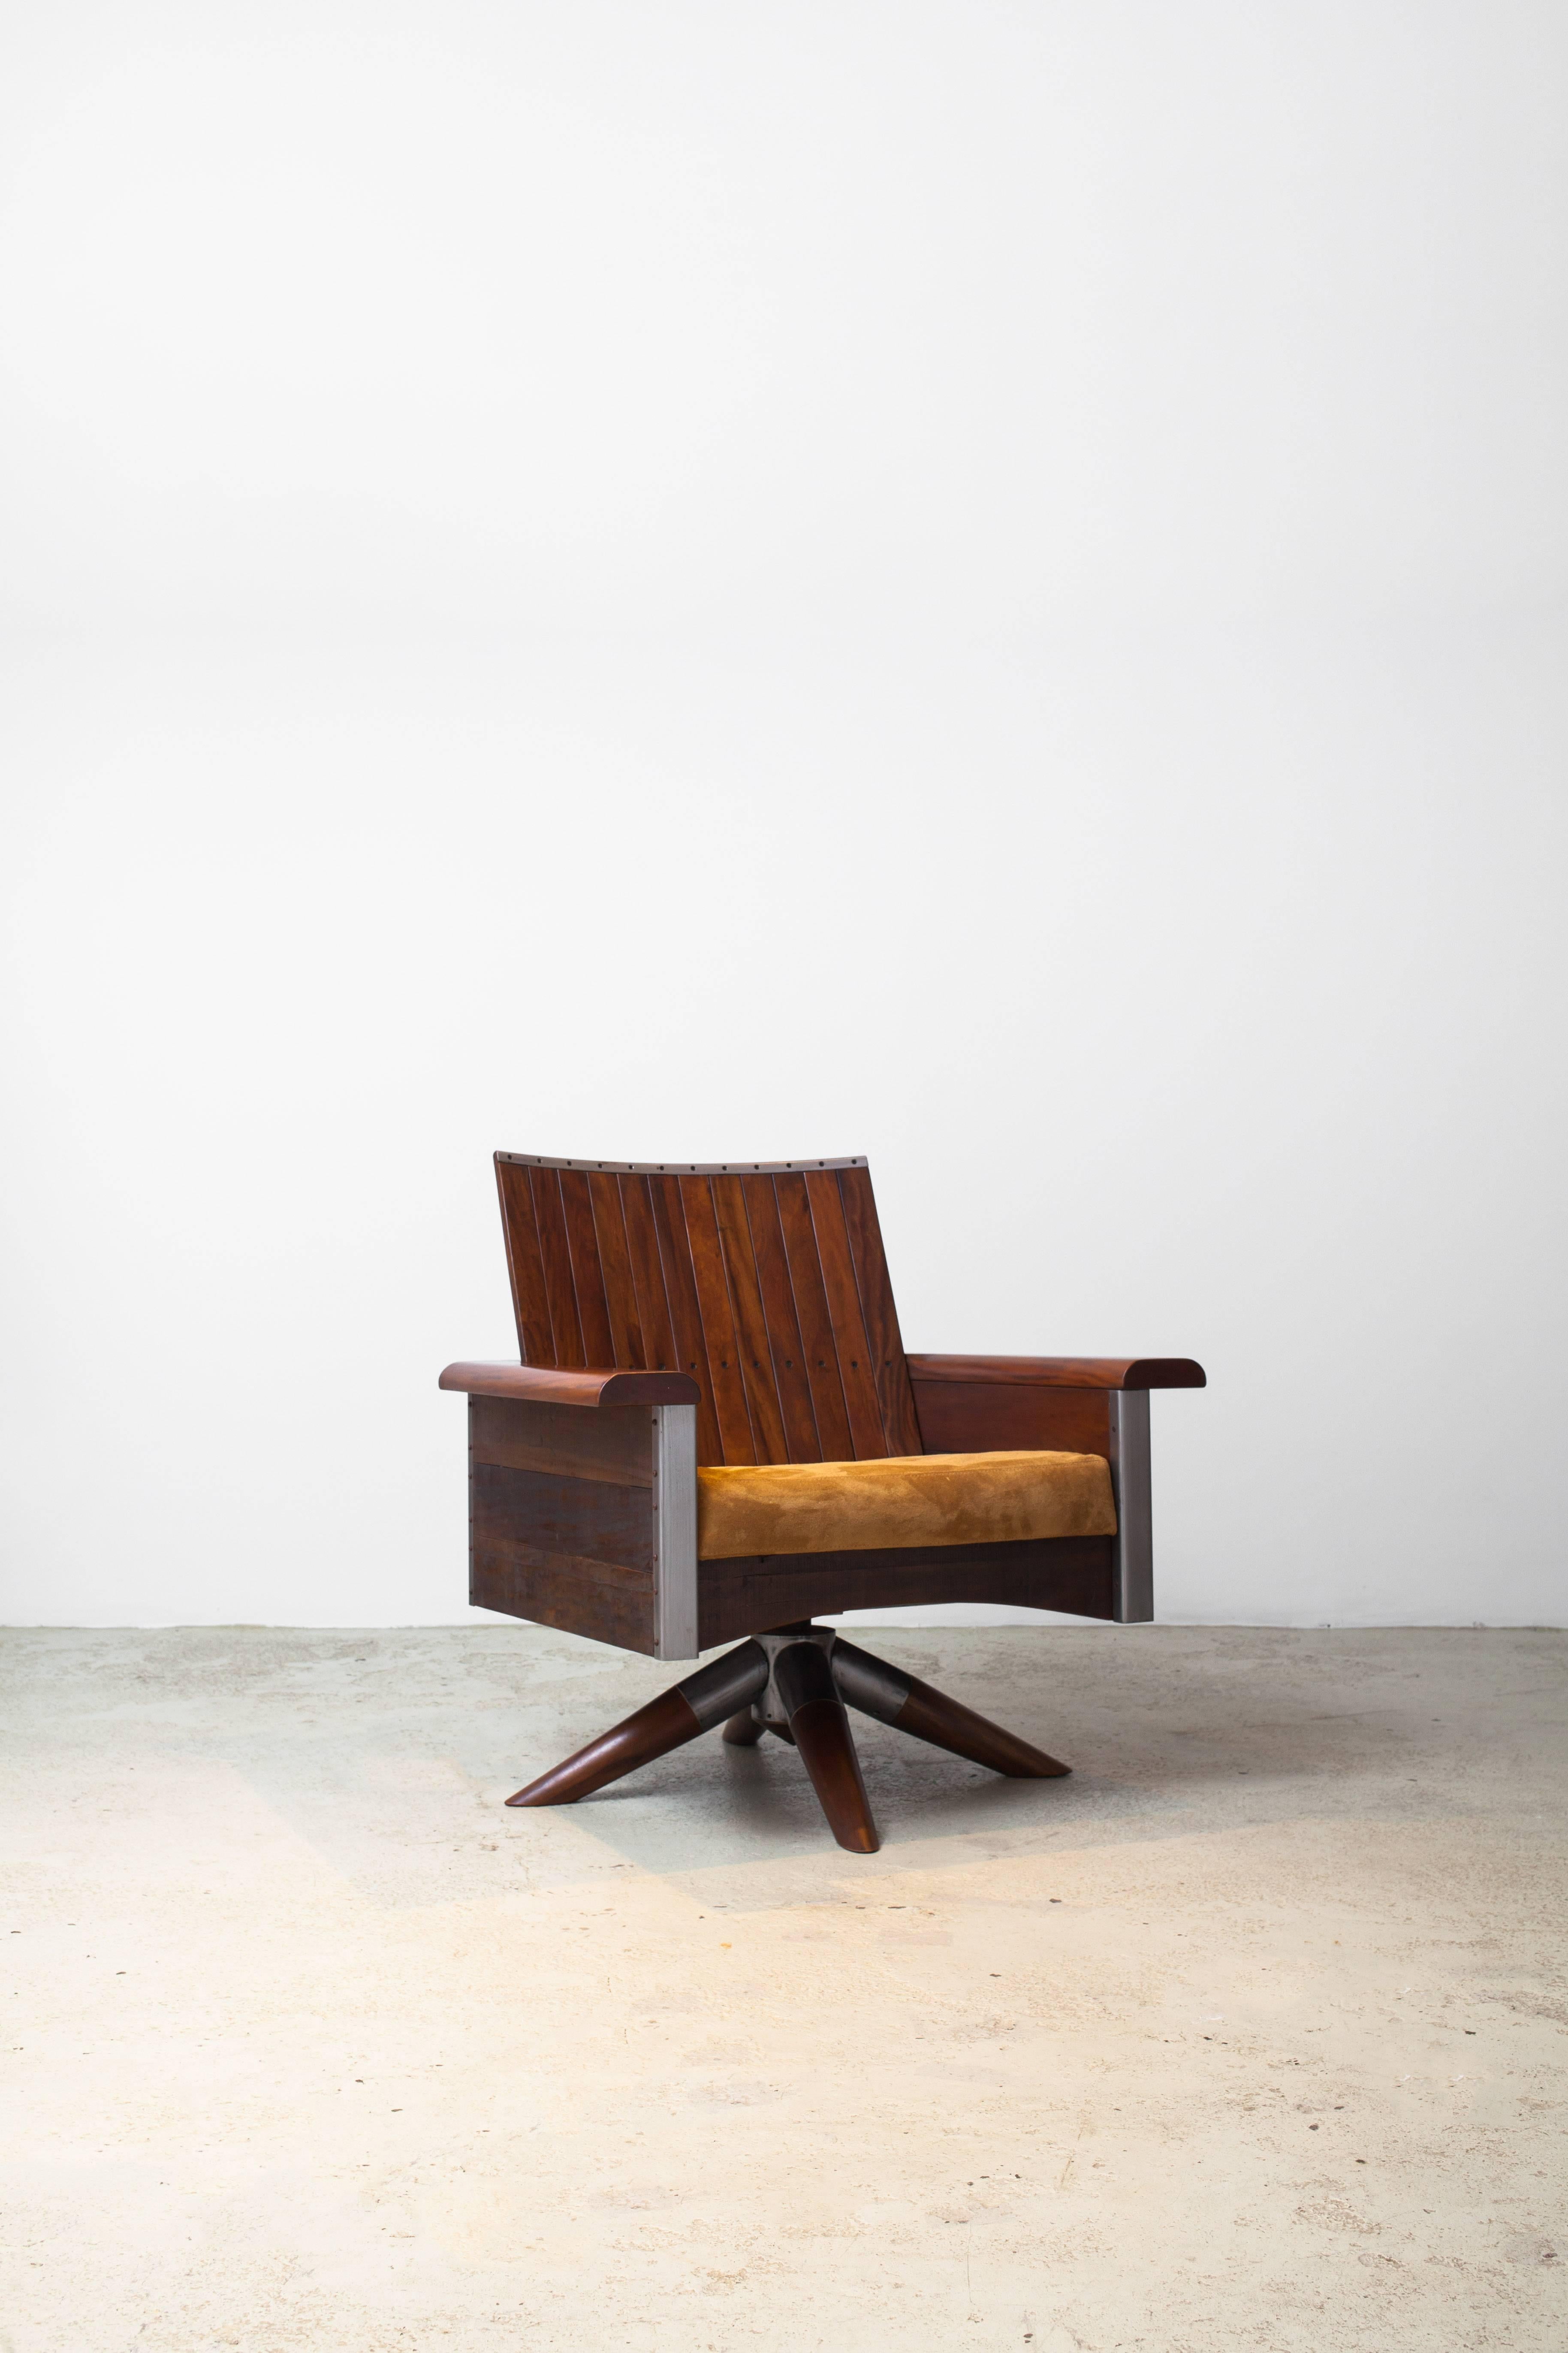 Sergio Swivel chair, 2014
Chair frame made in reclaimed Peroba Rosa wood and iron.
Seat cushion made in Suede.